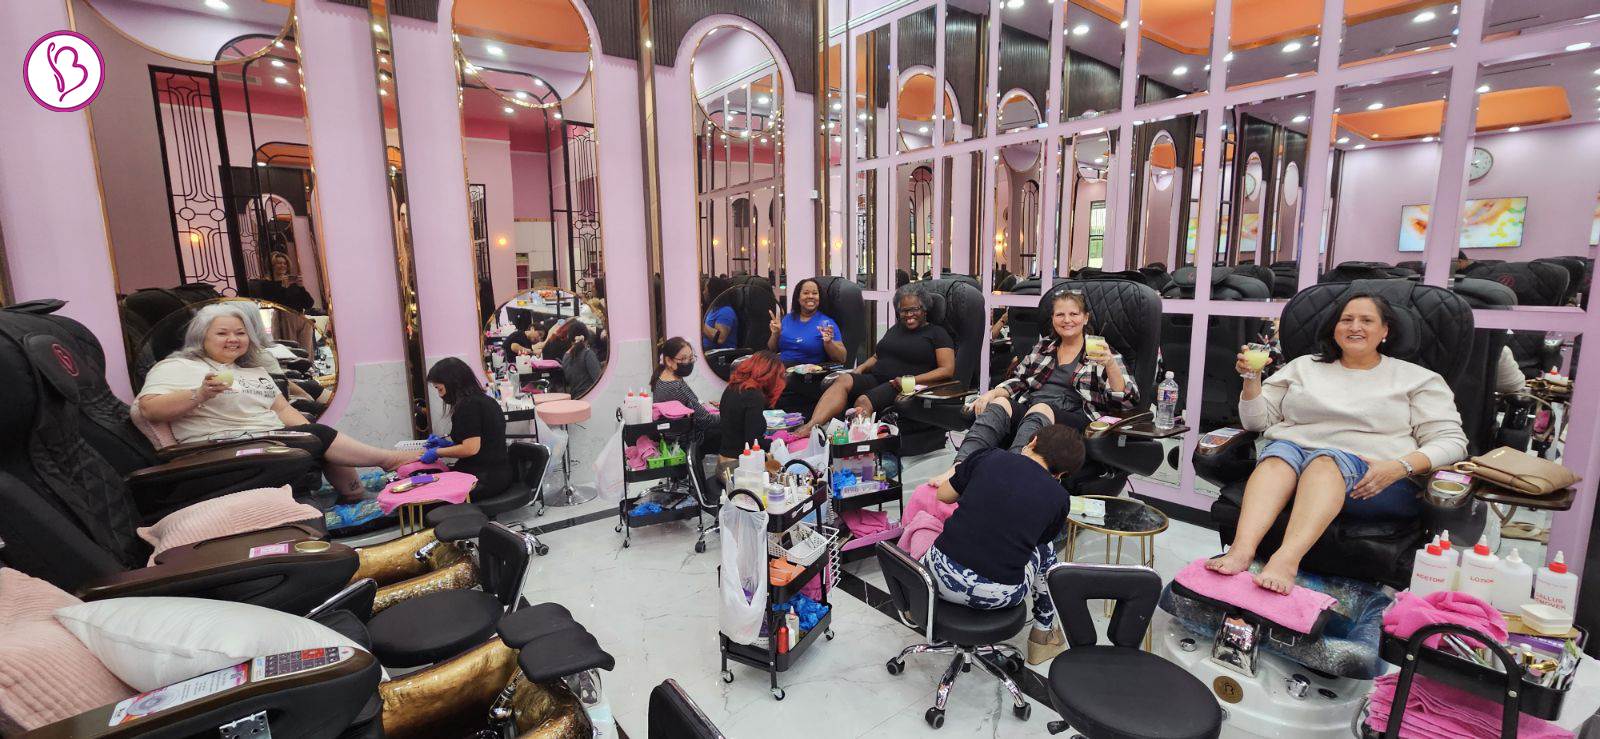 The Ultimate Guide to Finding Walk In Nail Salons Near Me